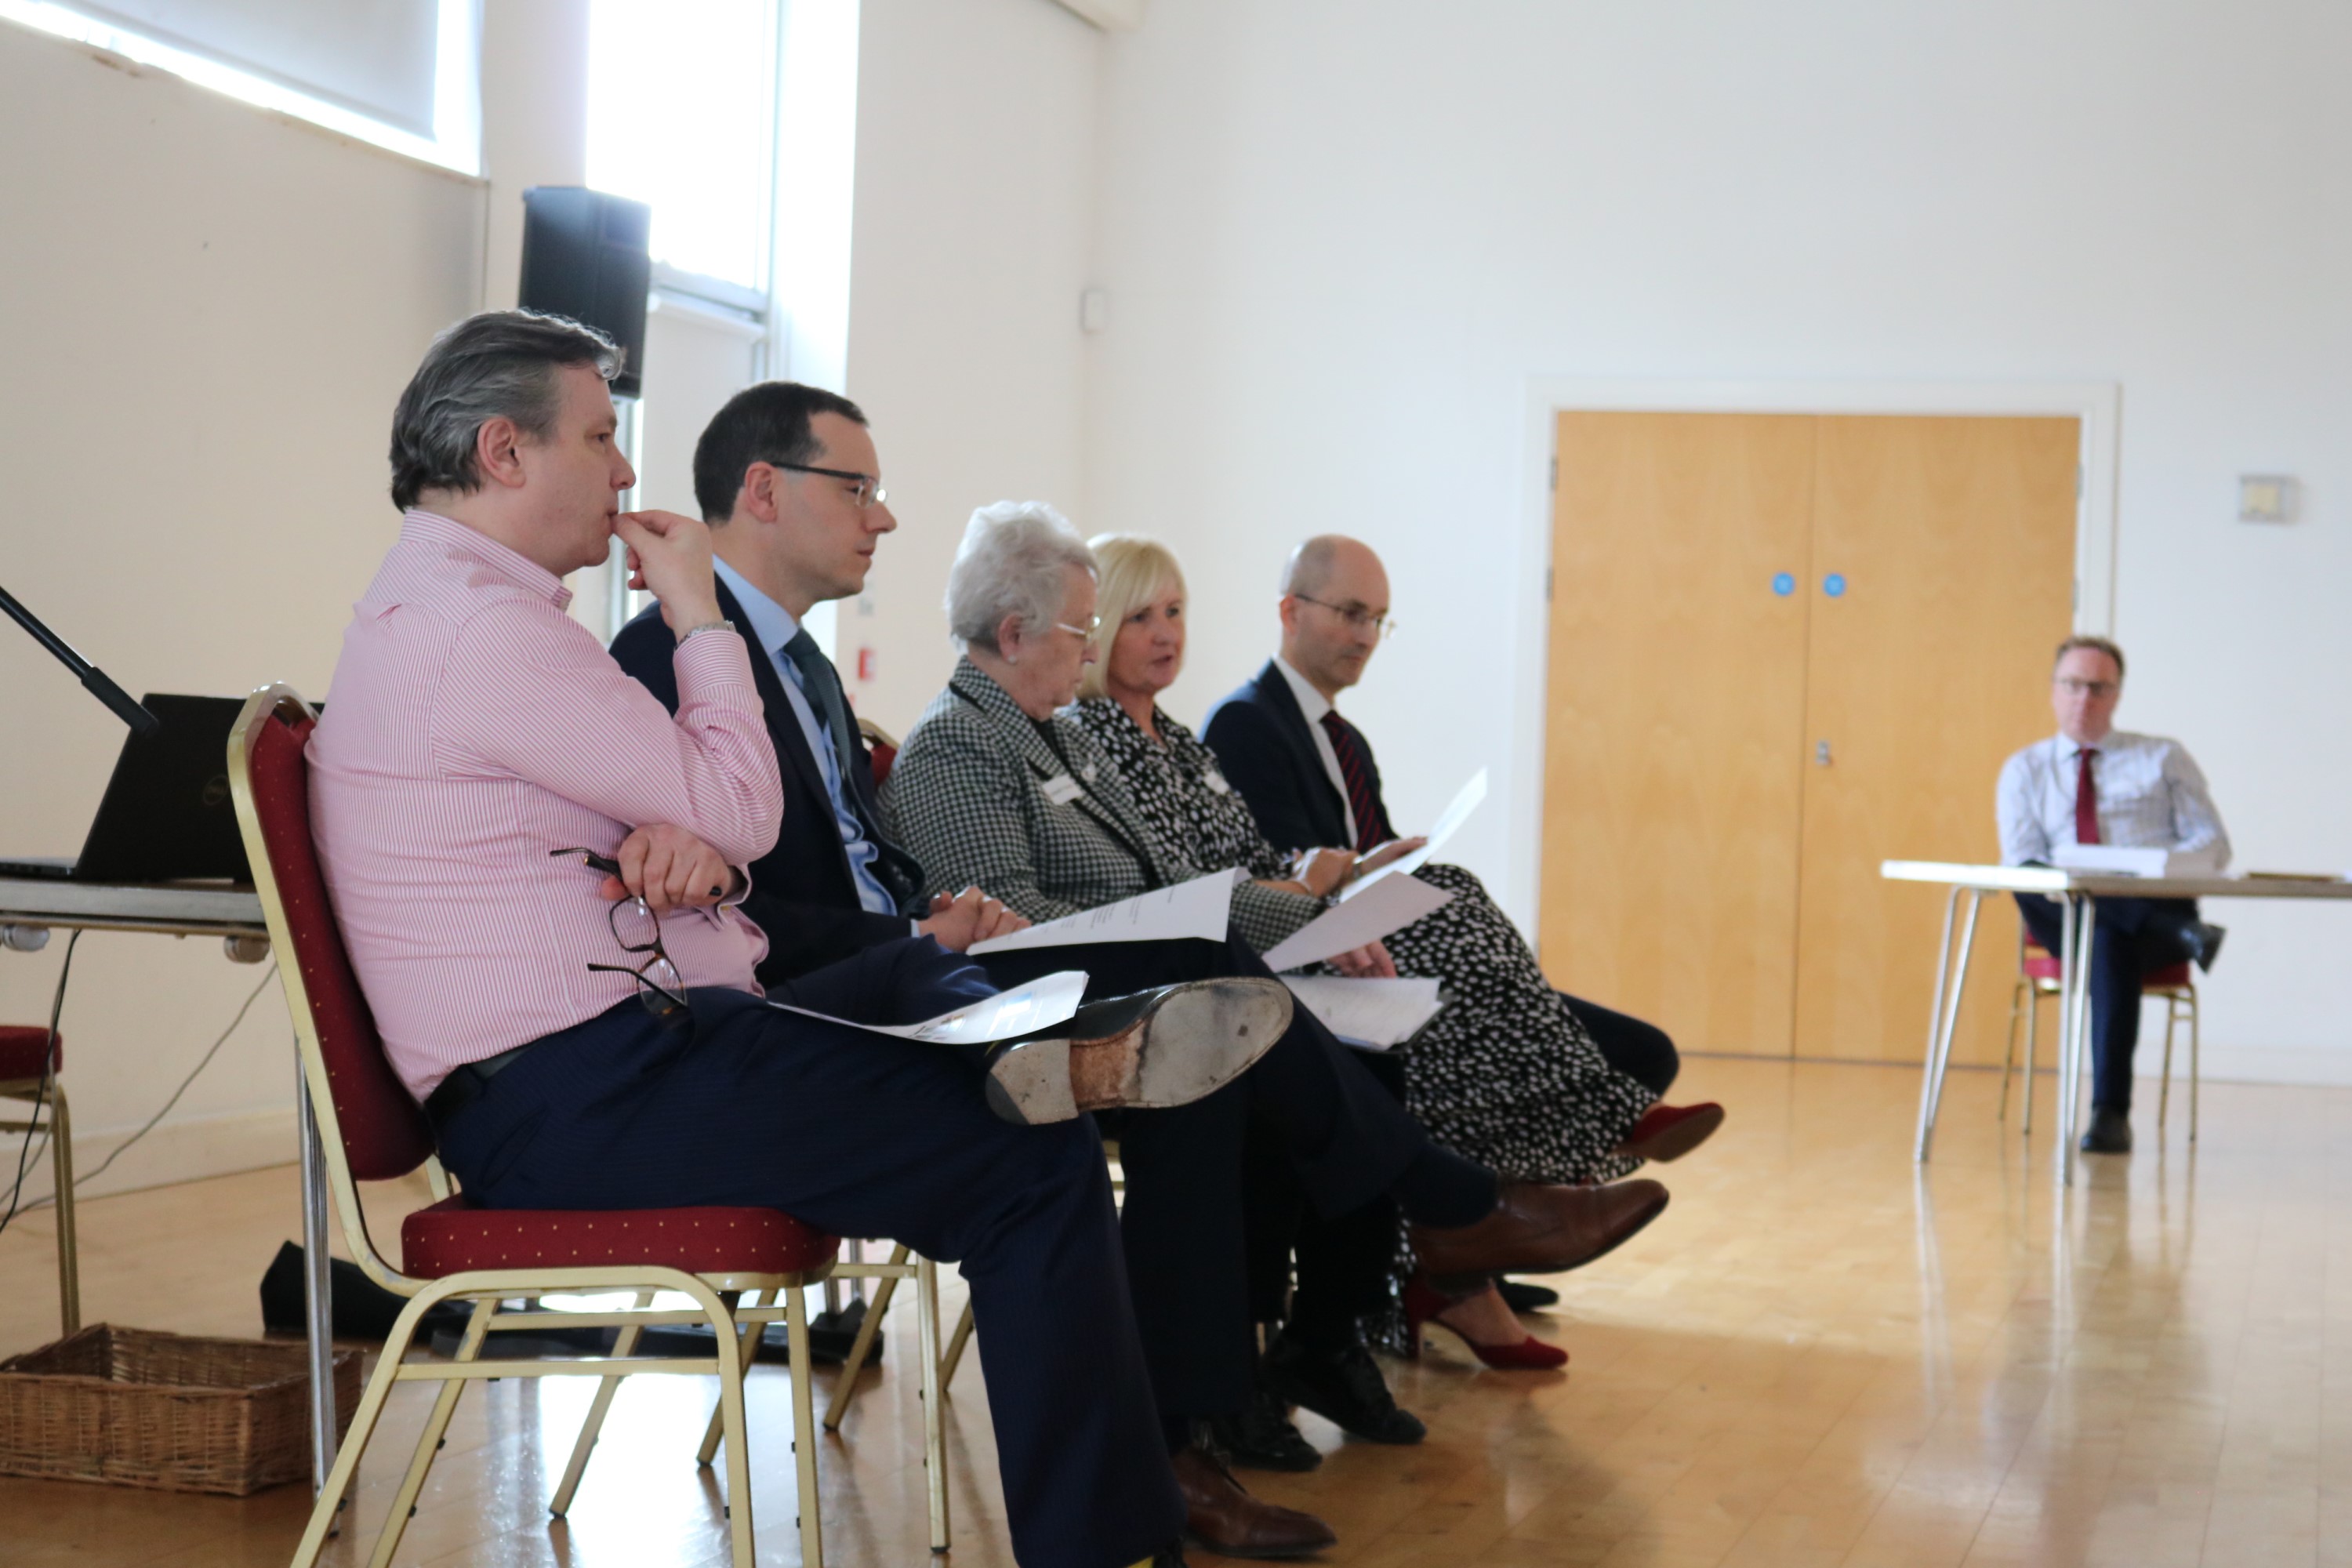 Panel discussion with (from left) Mark Baker, Controlled Schools' Support Council; Robin McLaughlin OBE, Principal of Banbridge Academy; Rosemary Rainey OBE, TRC Chair; Cindy Poots, Principal of Seagoe Primary School; and Dr Noel Purdy; Stranmillis University College.